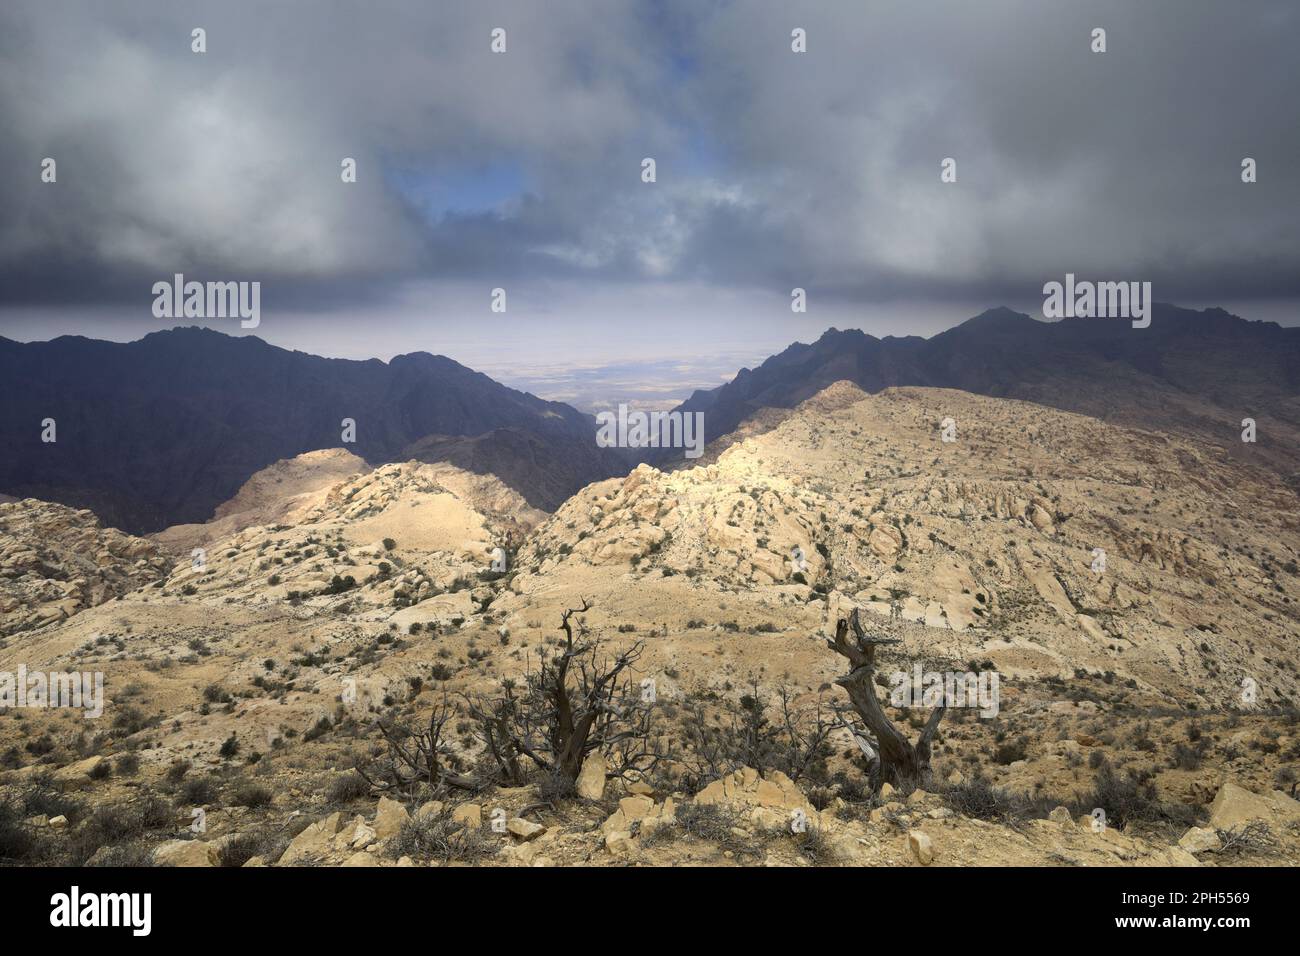 Abu mahmoud hi-res stock photography and images - Alamy